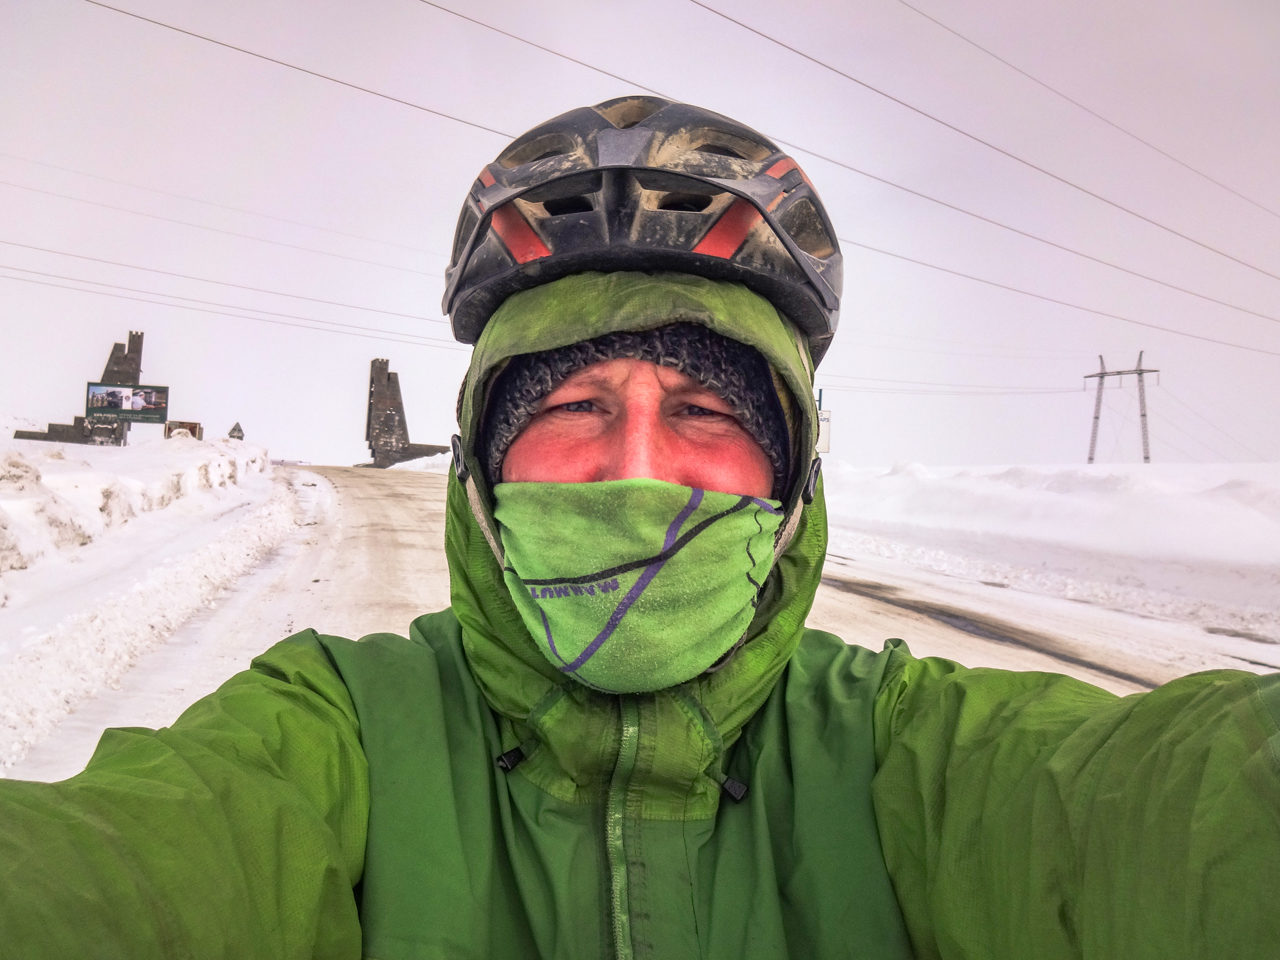 Just before a downhill in Armenia at -15 degrees